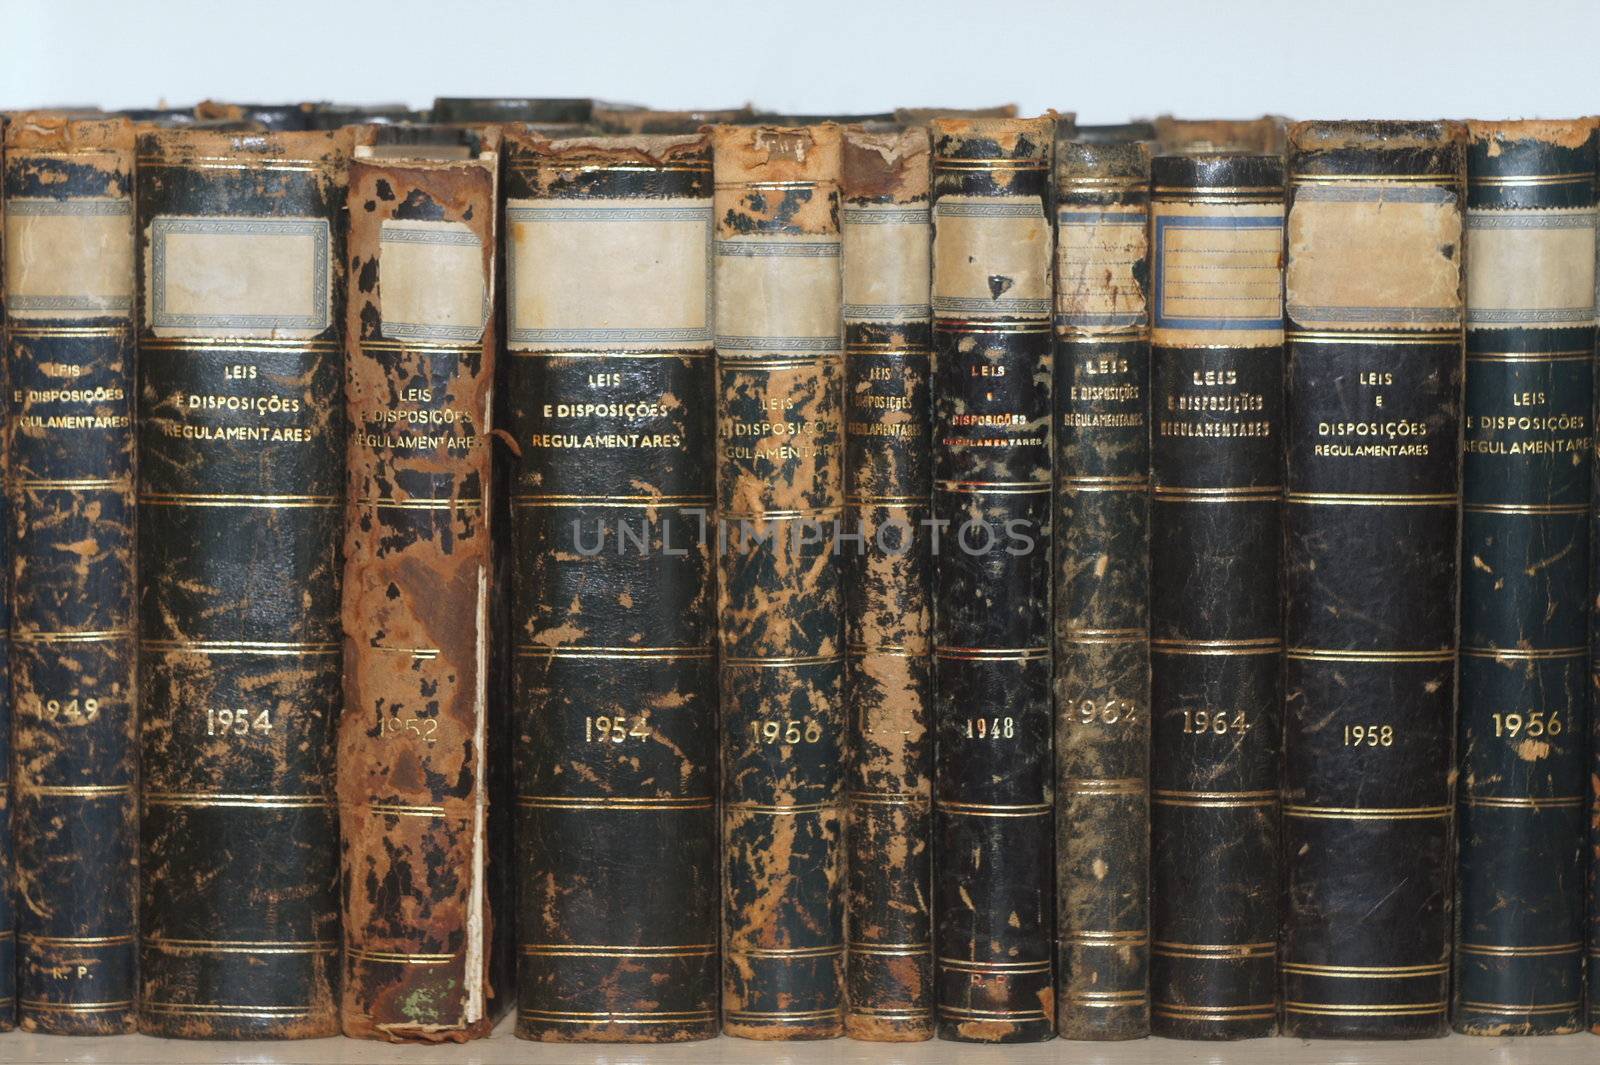 Row of old books on a bookshelf. Many of the books show lots of wear and damage from aging. The text in the book cover isn't a trademark